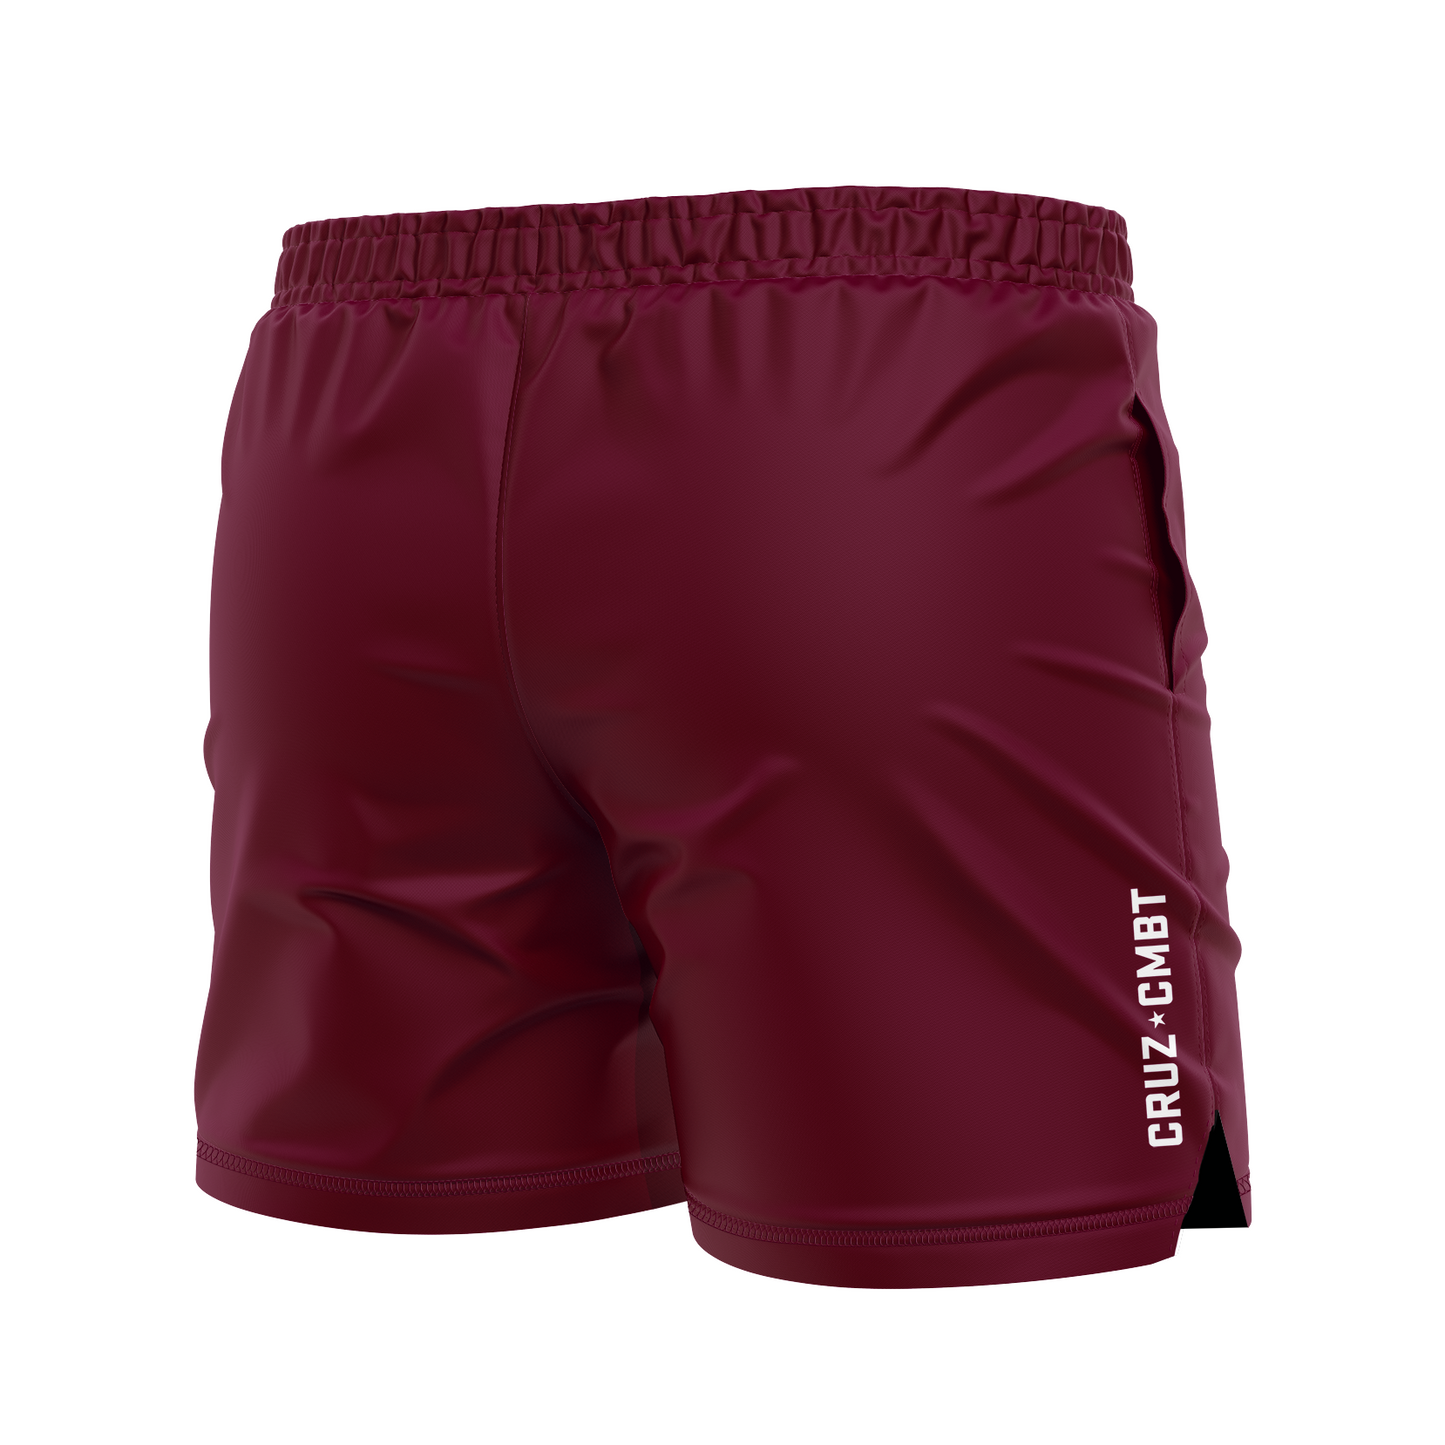 Base Collection men's FC shorts, maroon